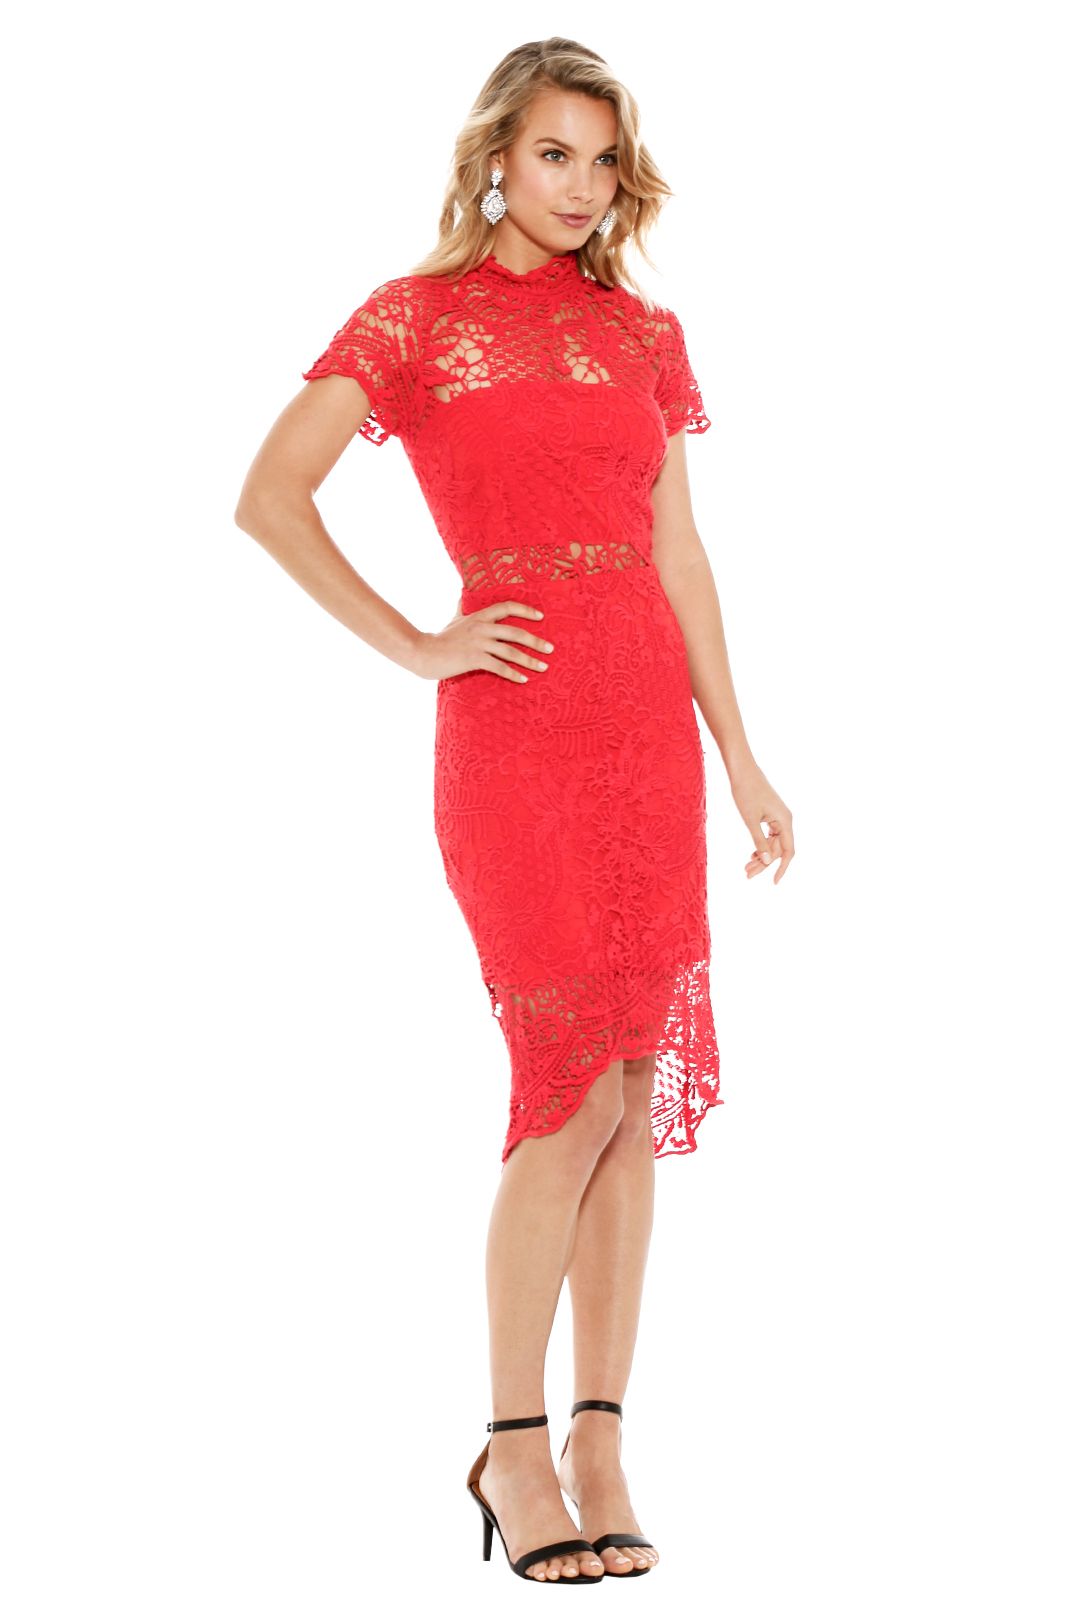 Thurley - Bed Of Roses Lace Dress - Red - Front